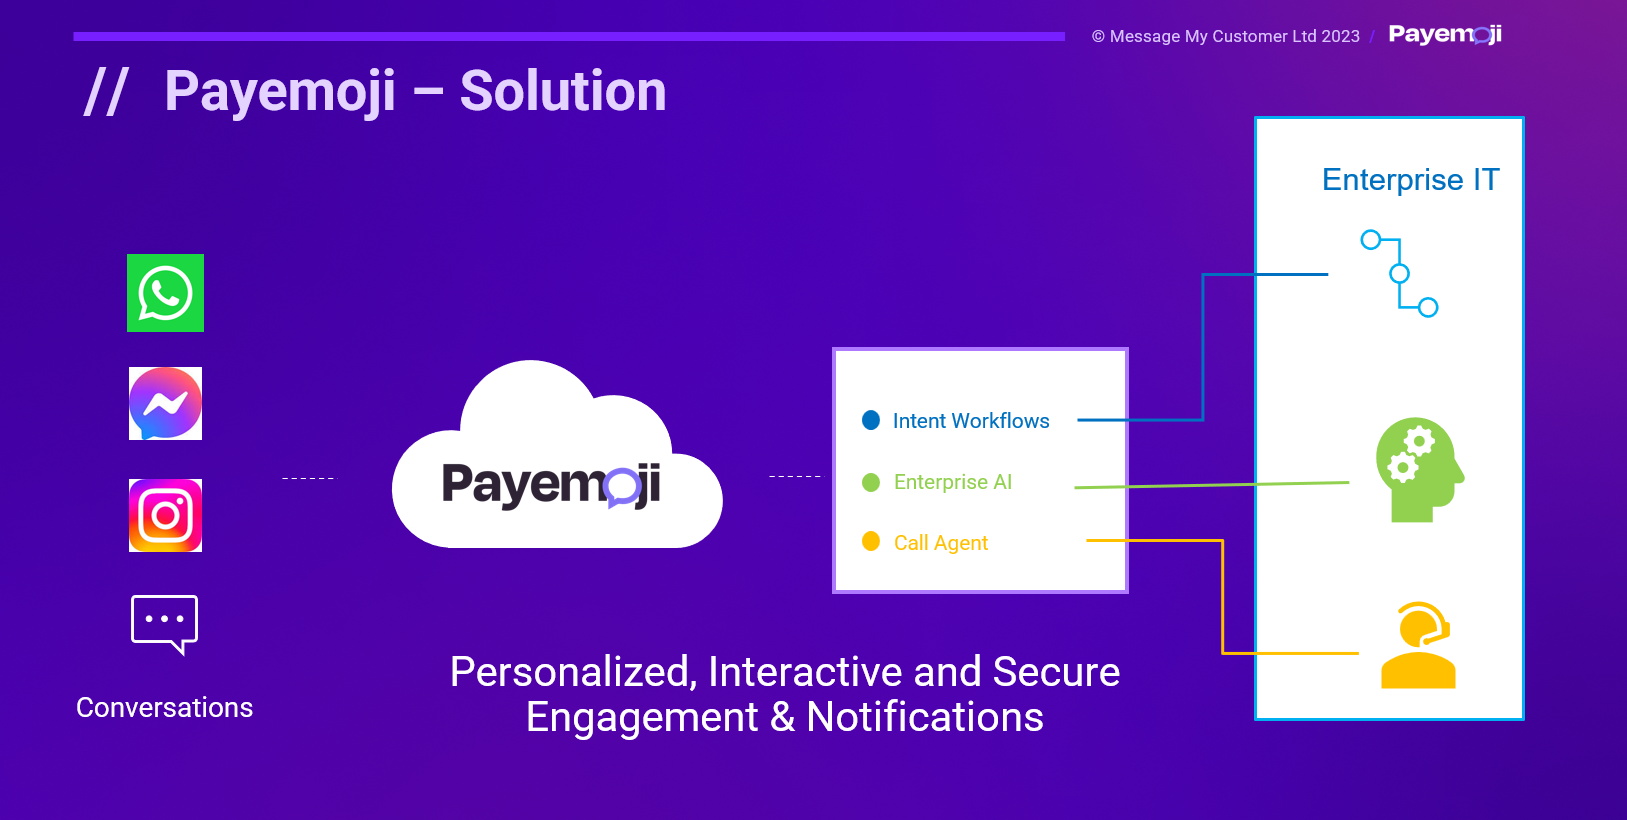 Conversational commerce Payemoji integration to IT systems